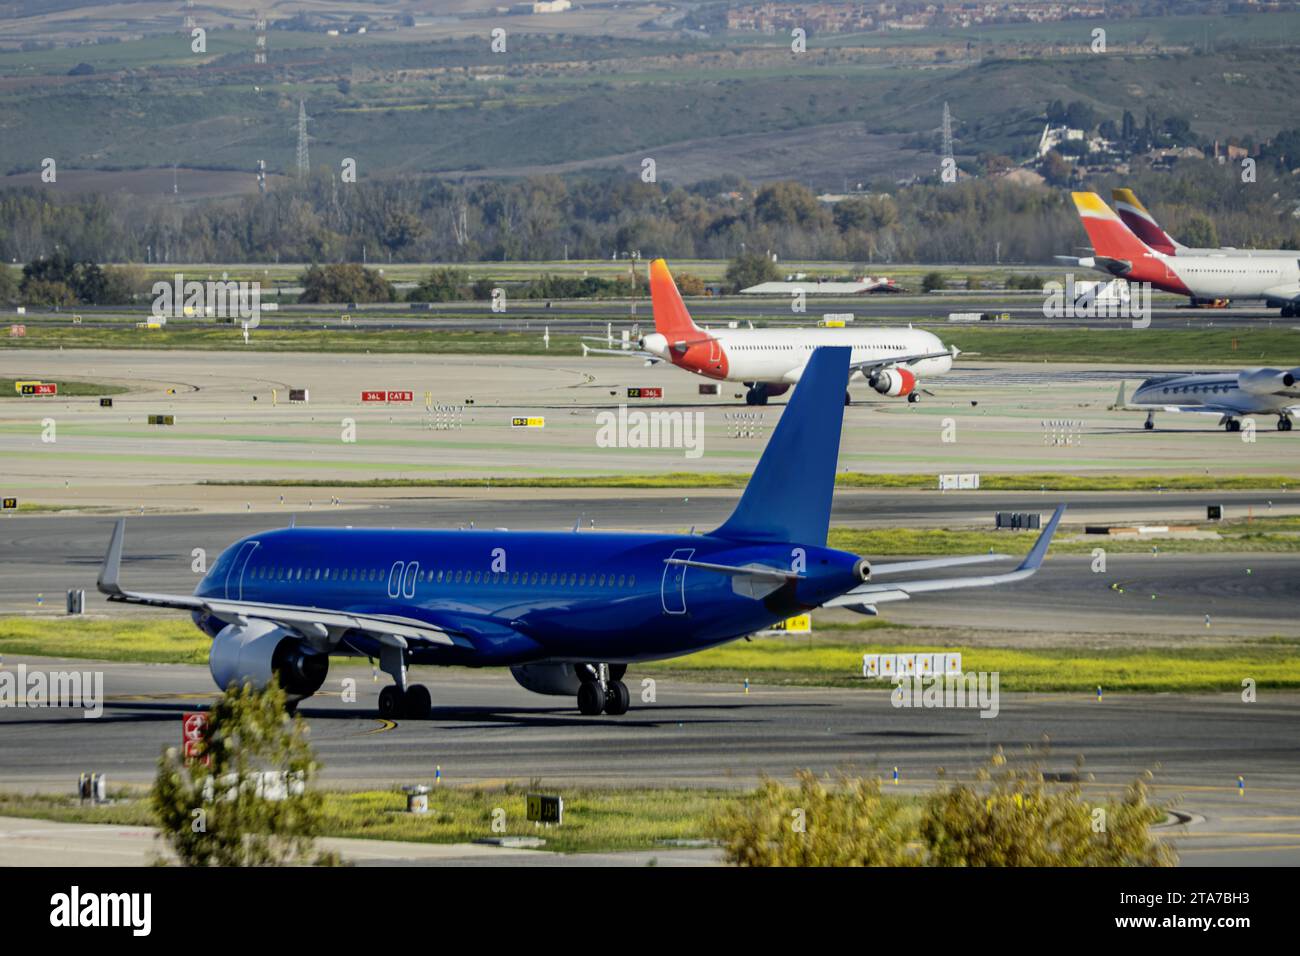 A blue airplane transiting the access runways Stock Photo